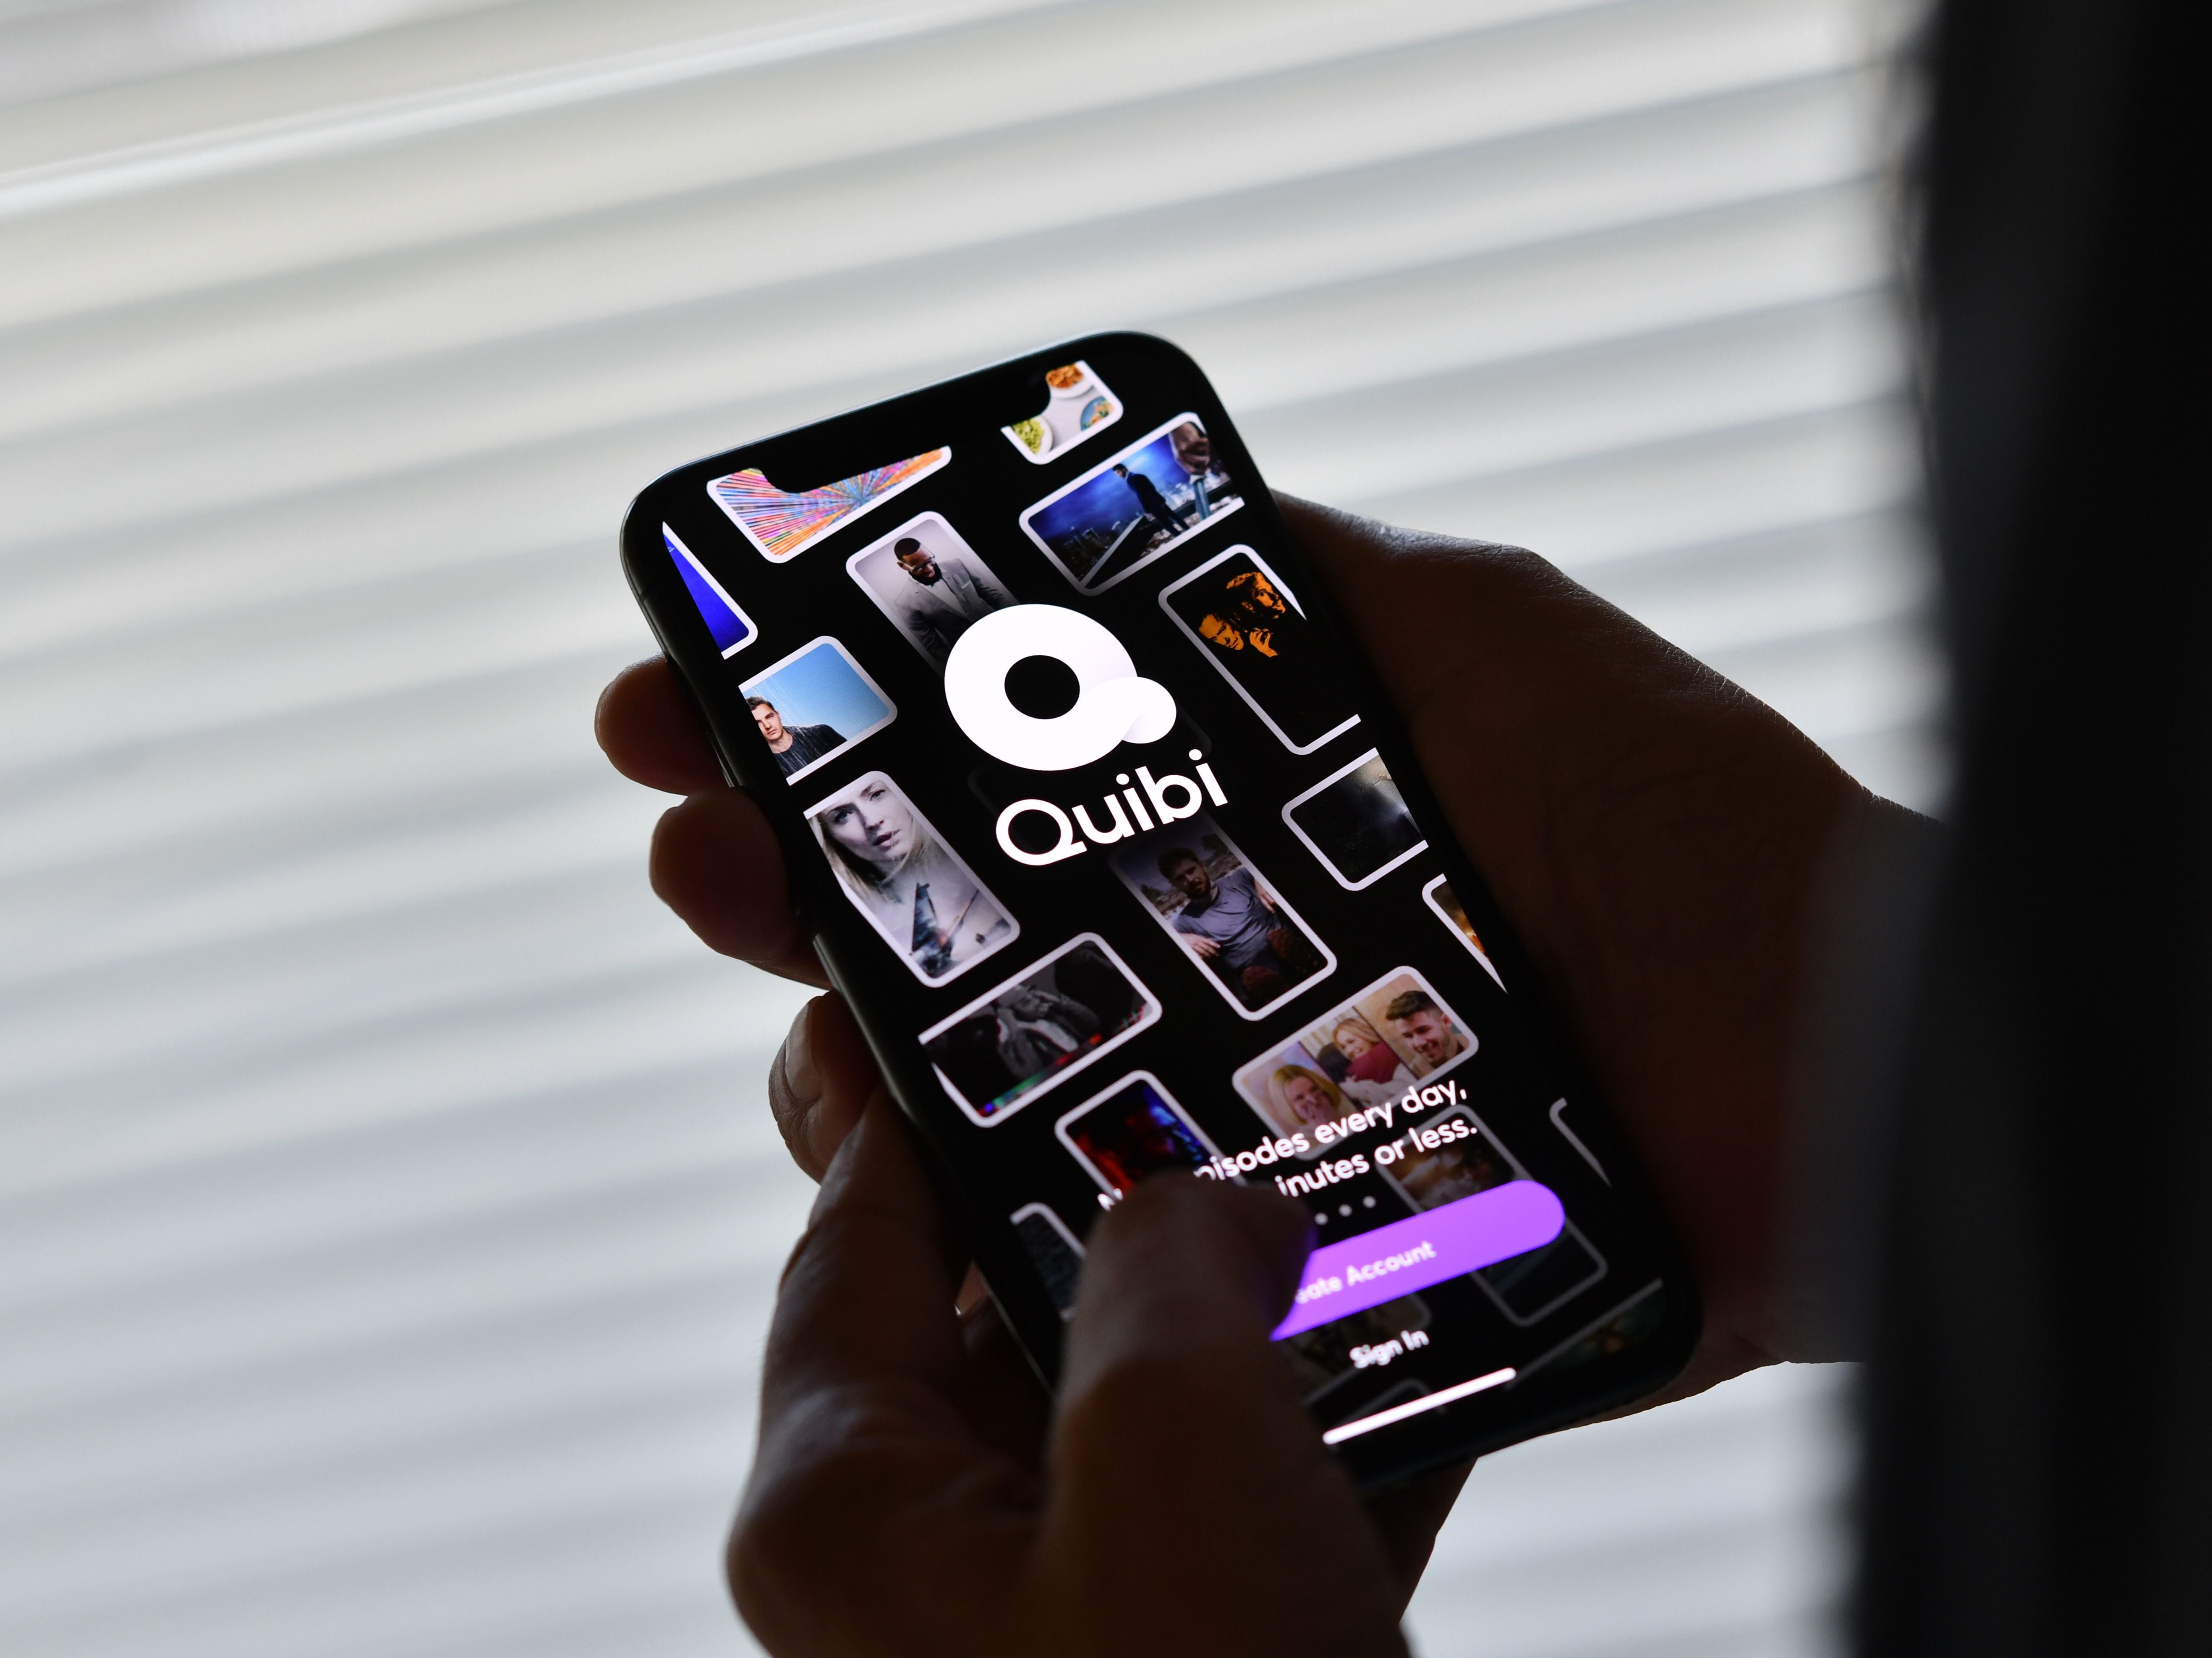 Quibi had an unsuccessful opening six months